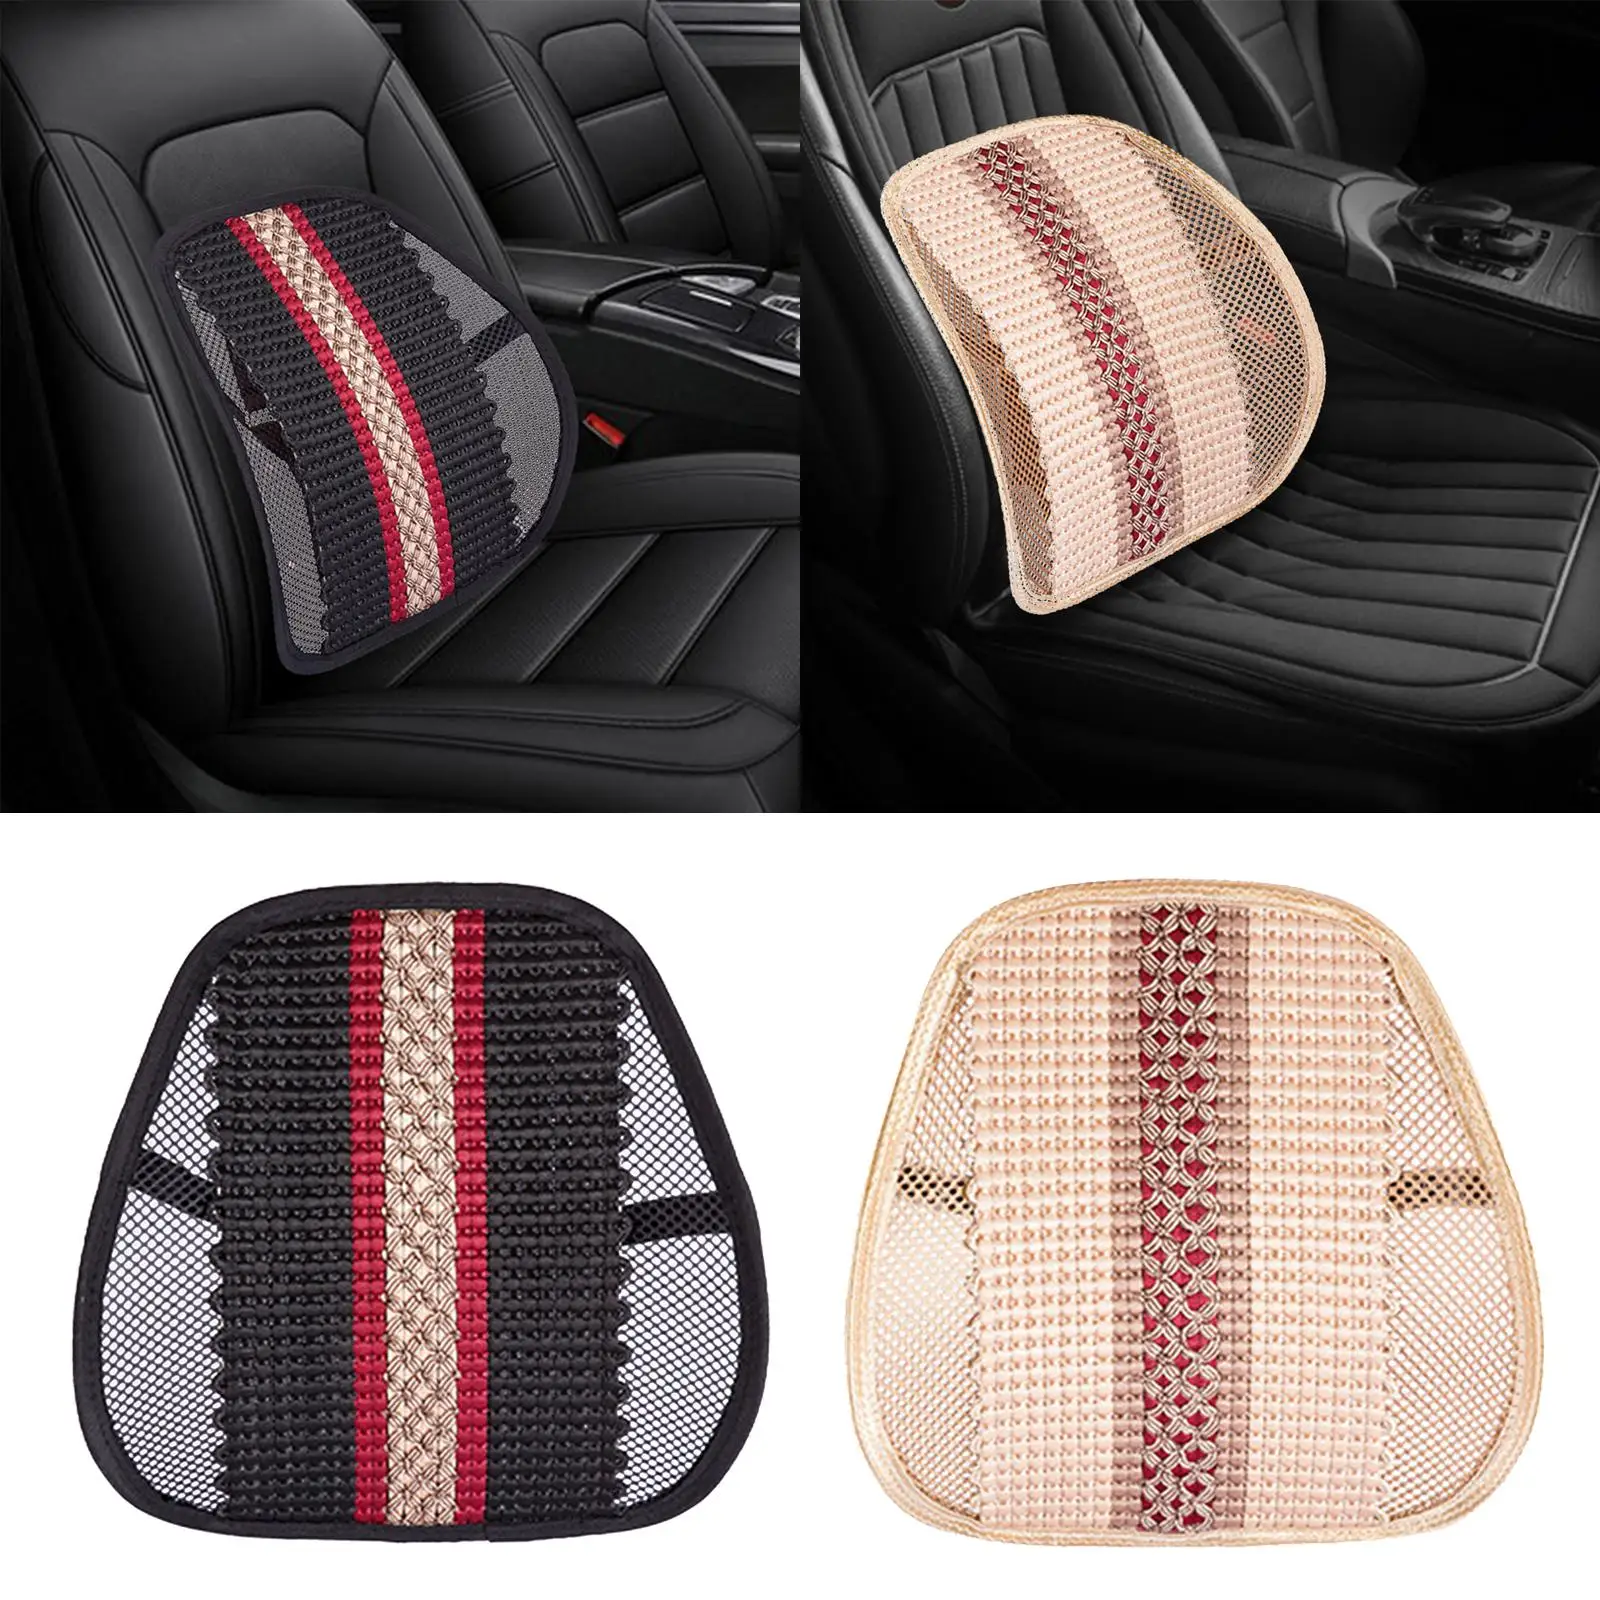 Back Support with Mesh, Mesh Back Support Cushion for Car Office Chair